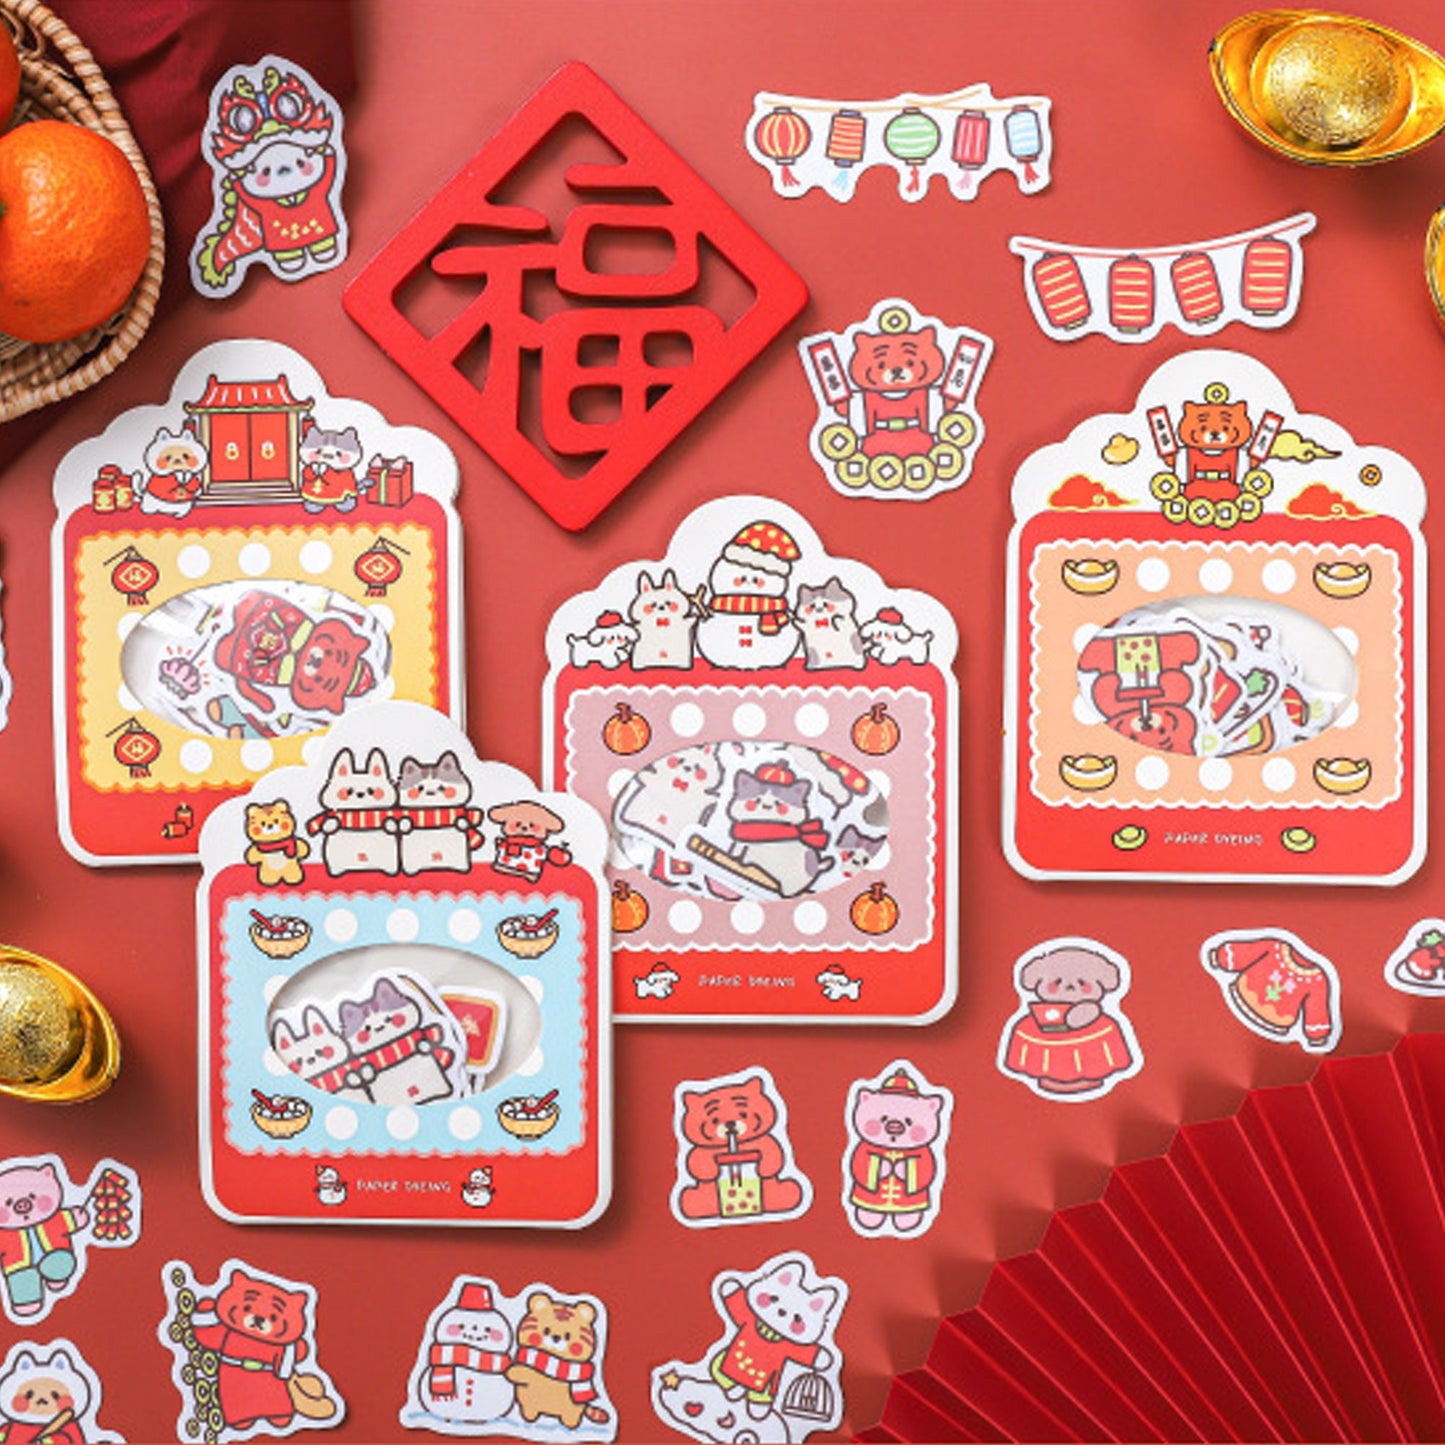 Stickers, Lunar New Year Flake Stickers, Animal Stickers, Cute Stickers, Kawaii Stickers, Celebrate Stickers, Bears, Puppies, Tiger Stickers